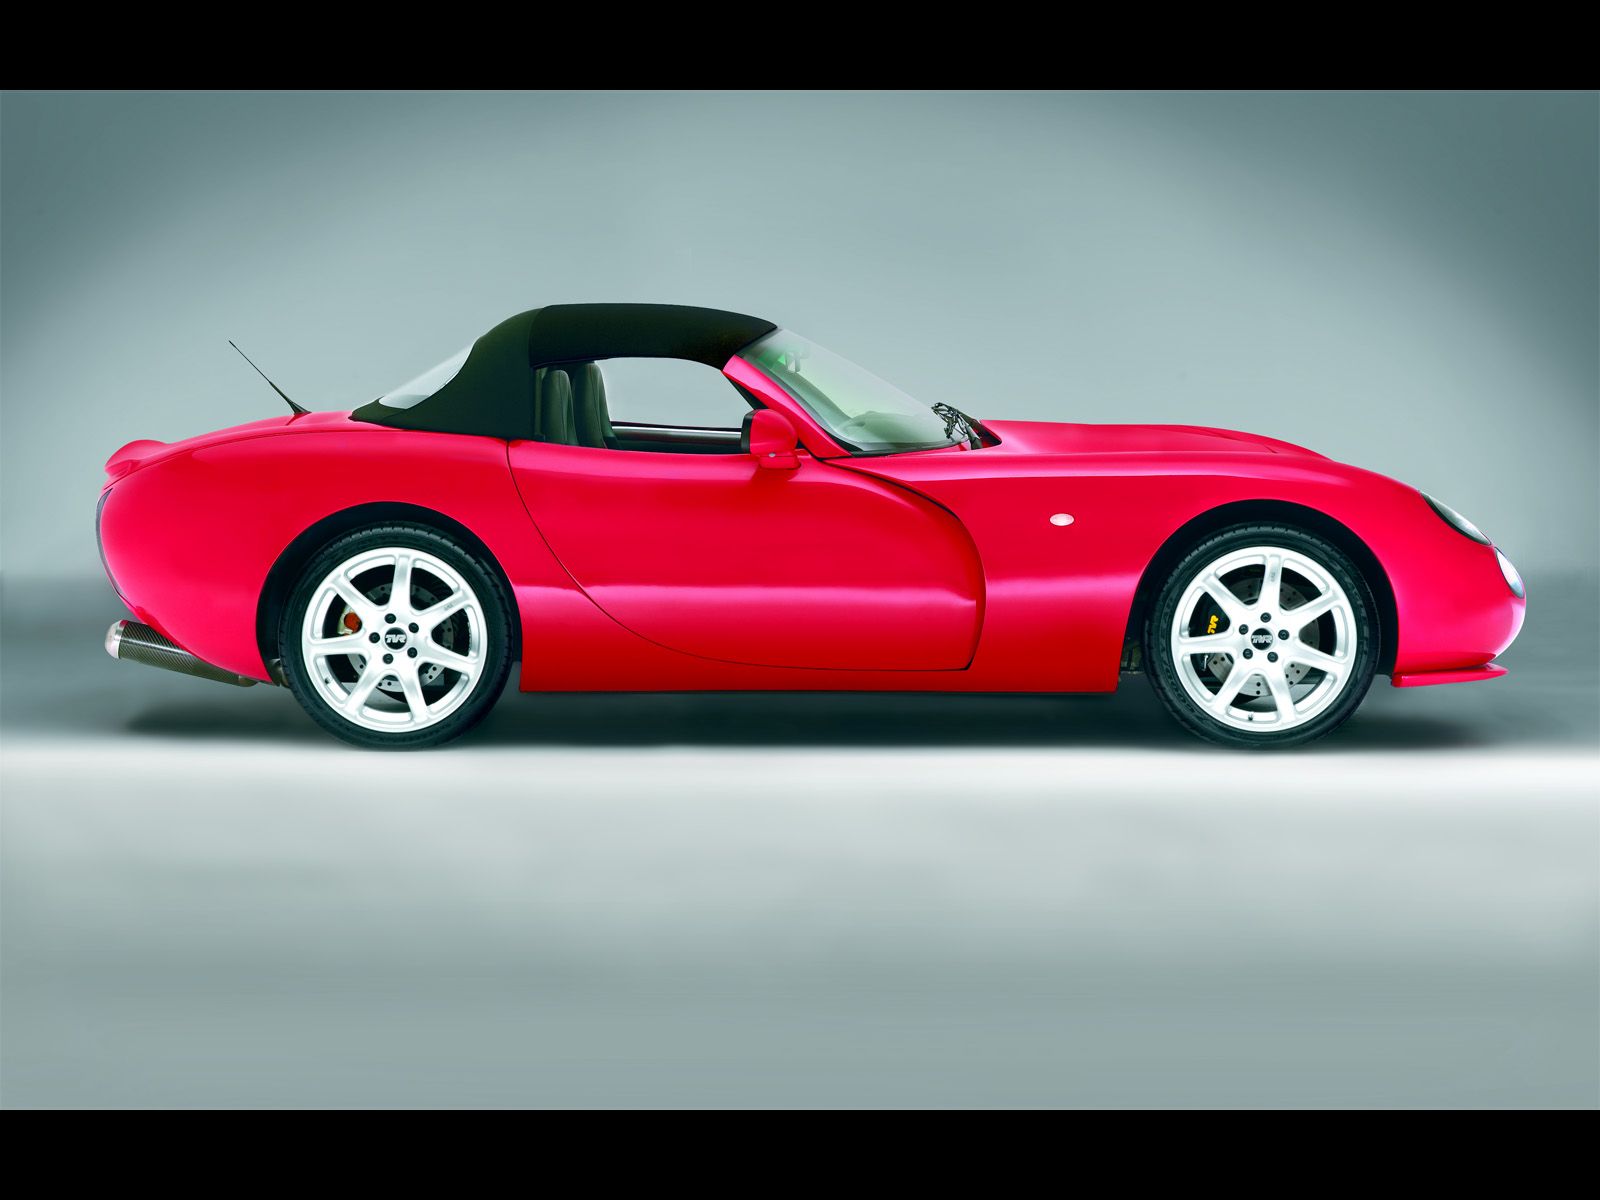 2006 TVR Tuscan S convertible